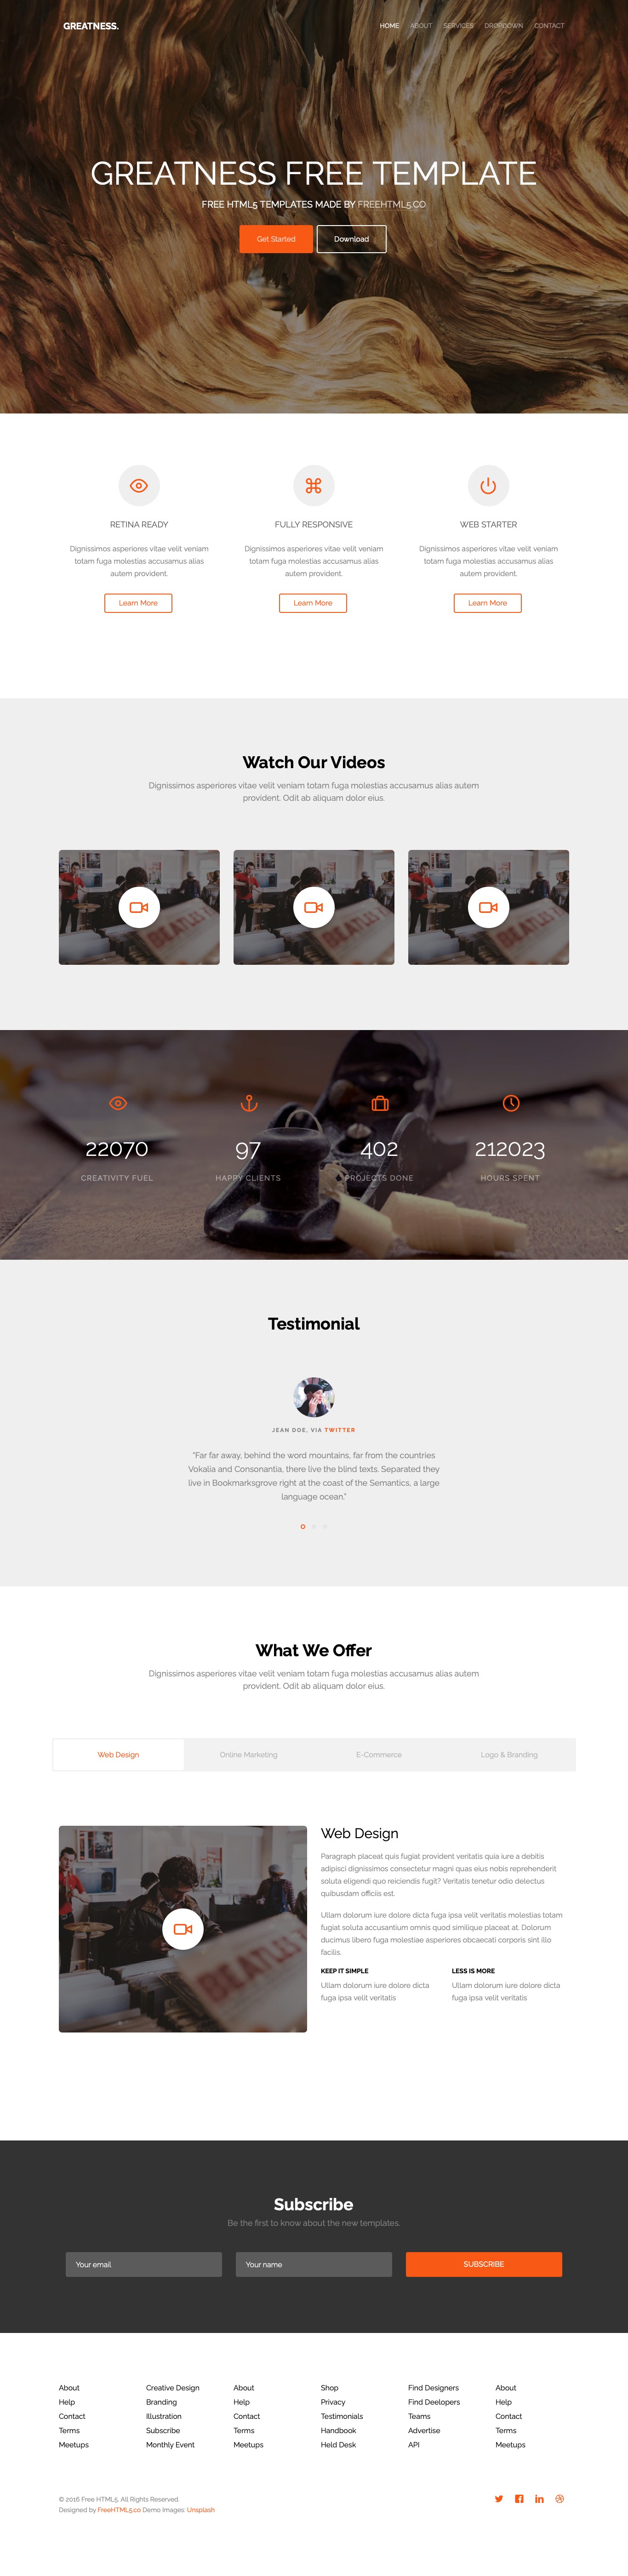 Greatness Free HTML template